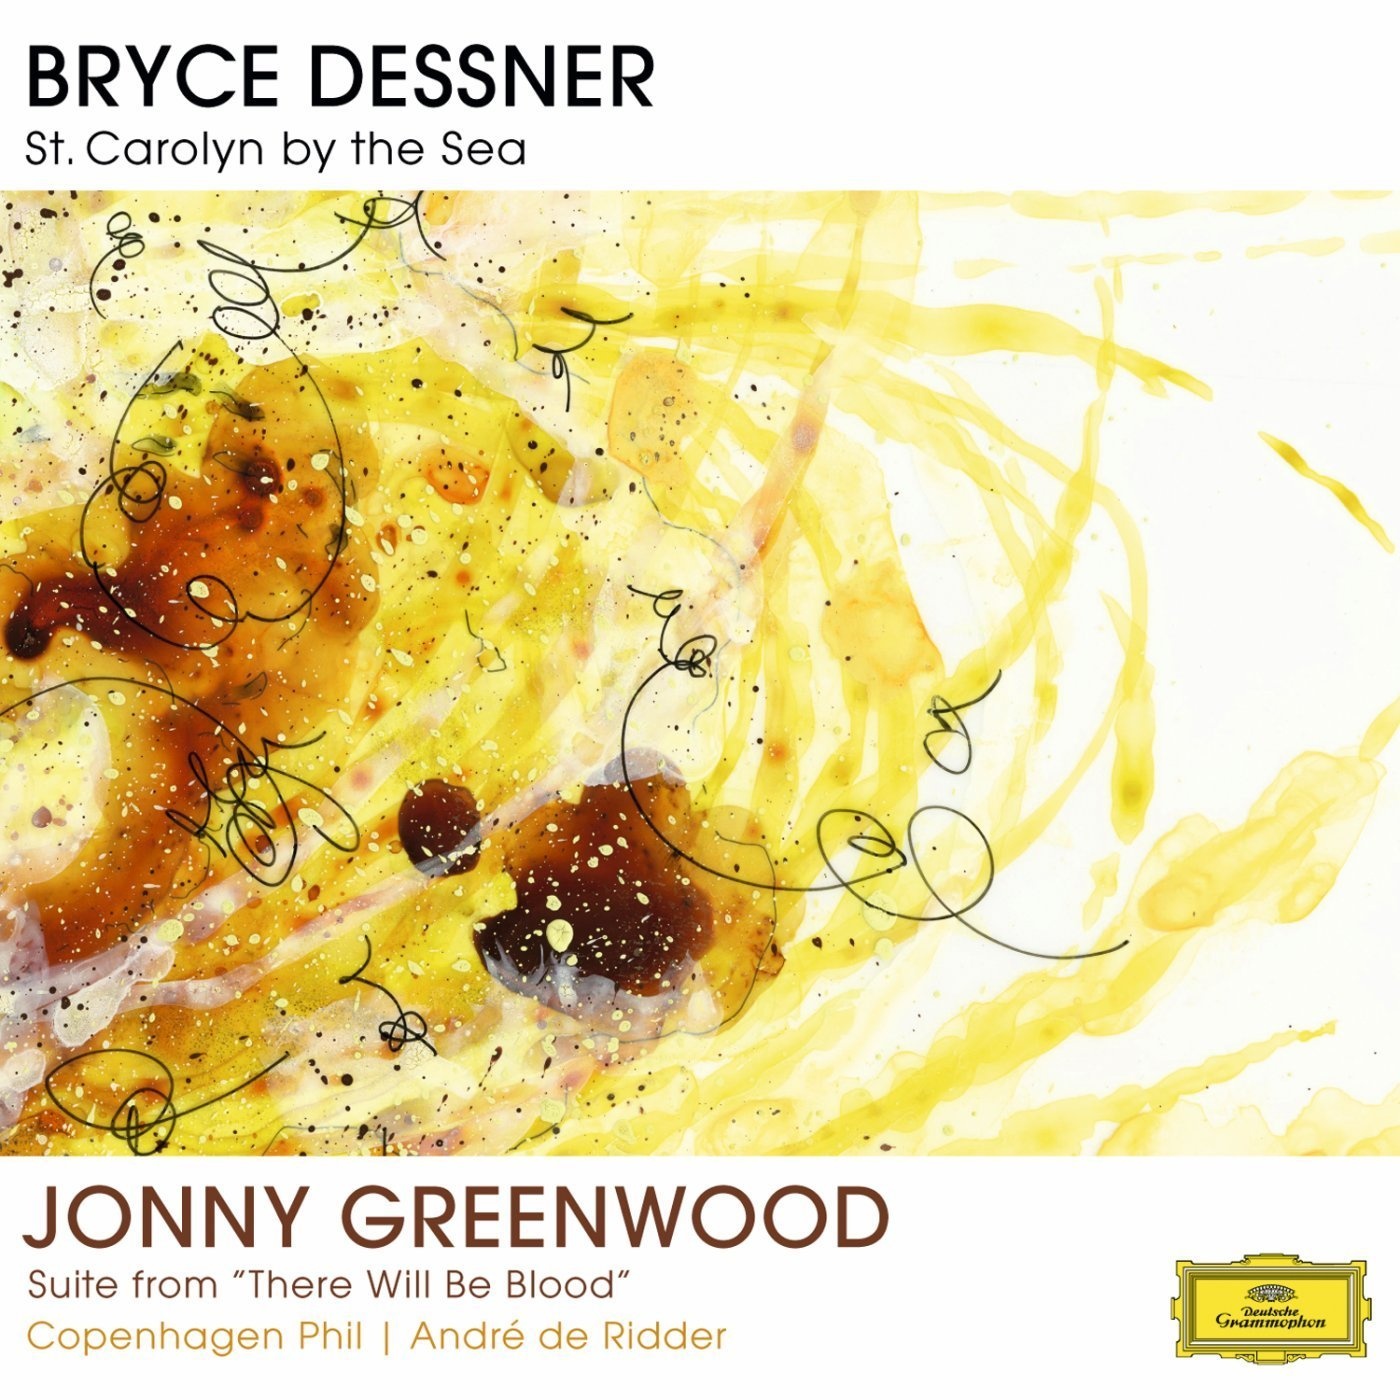 Dessner: St. Carolyn By The Sea; Greenwood: There Will Be Blood Suite